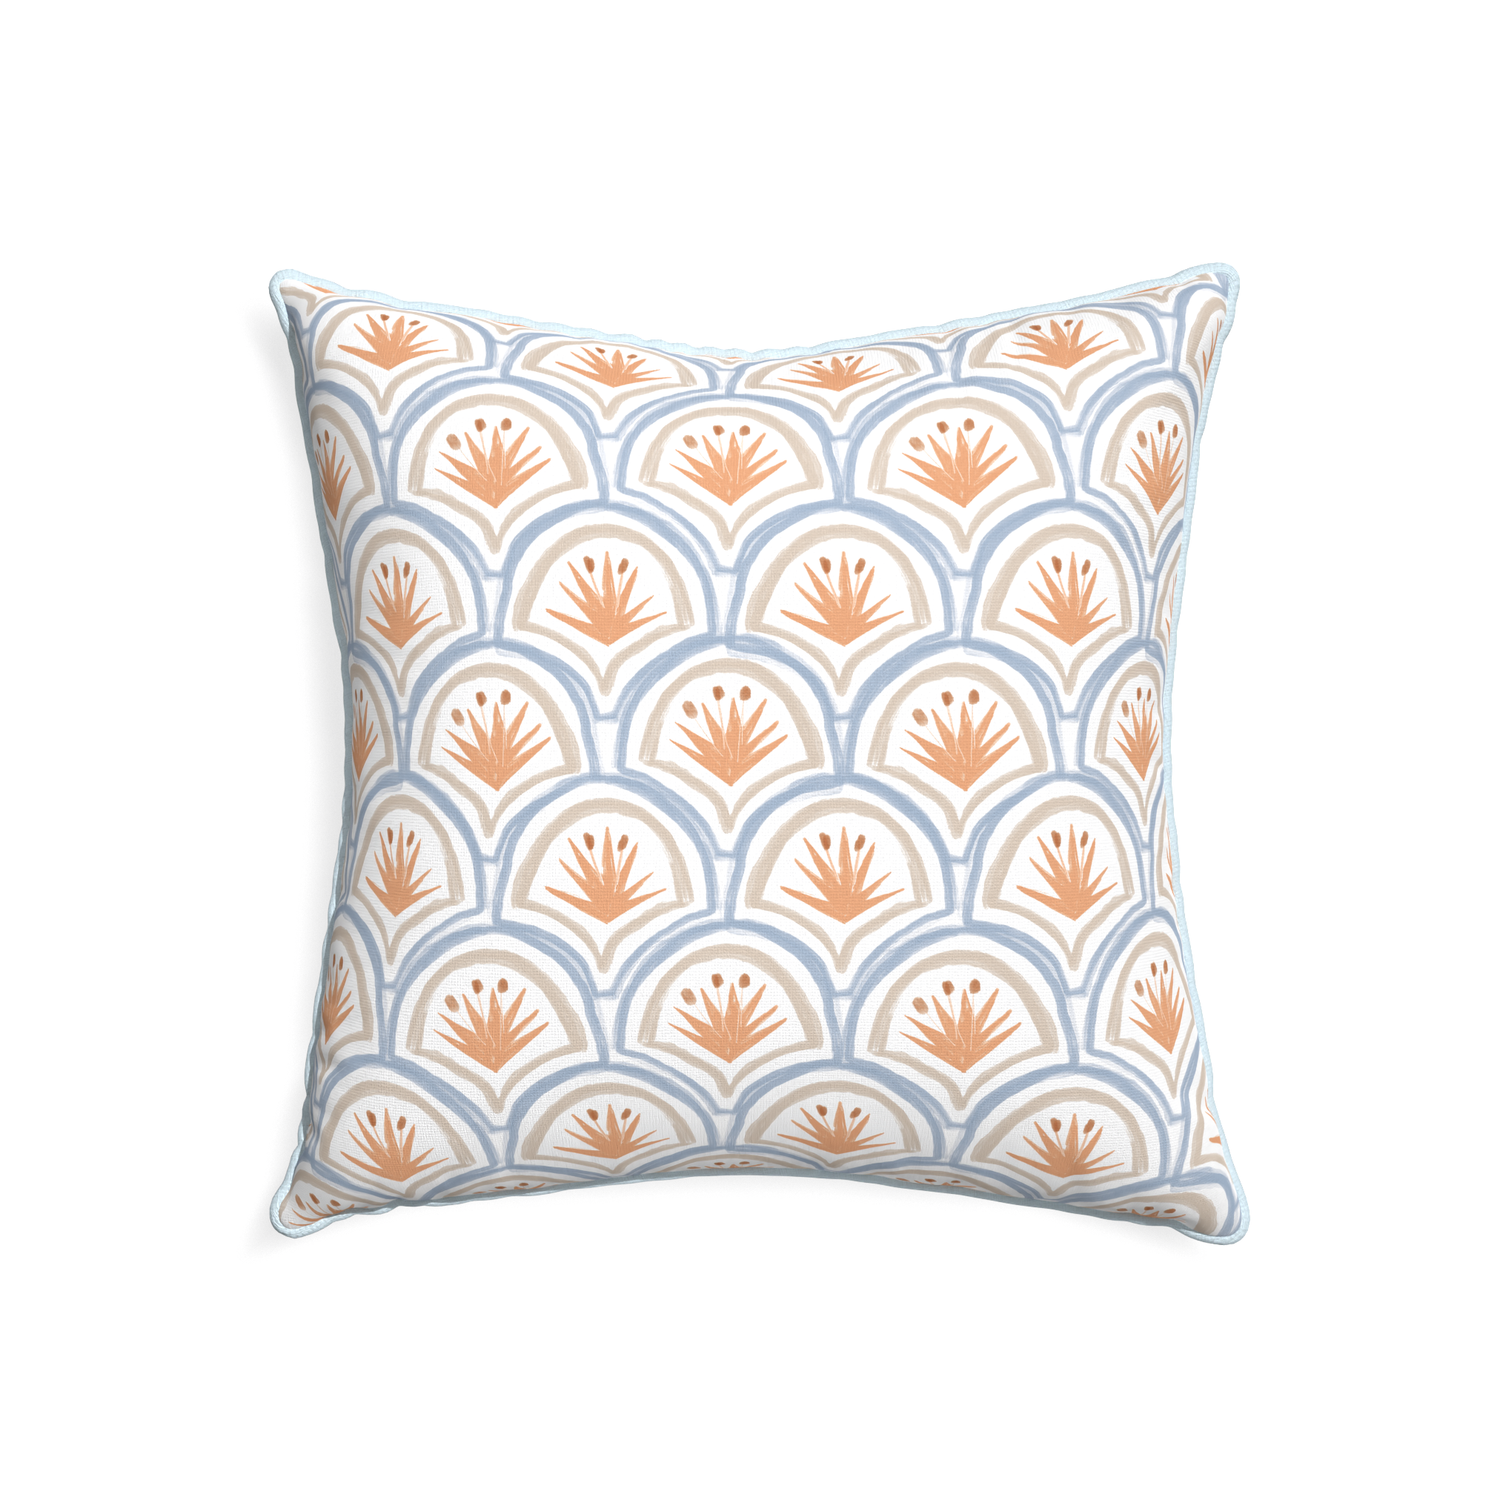 22-square thatcher apricot custom art deco palm patternpillow with powder piping on white background